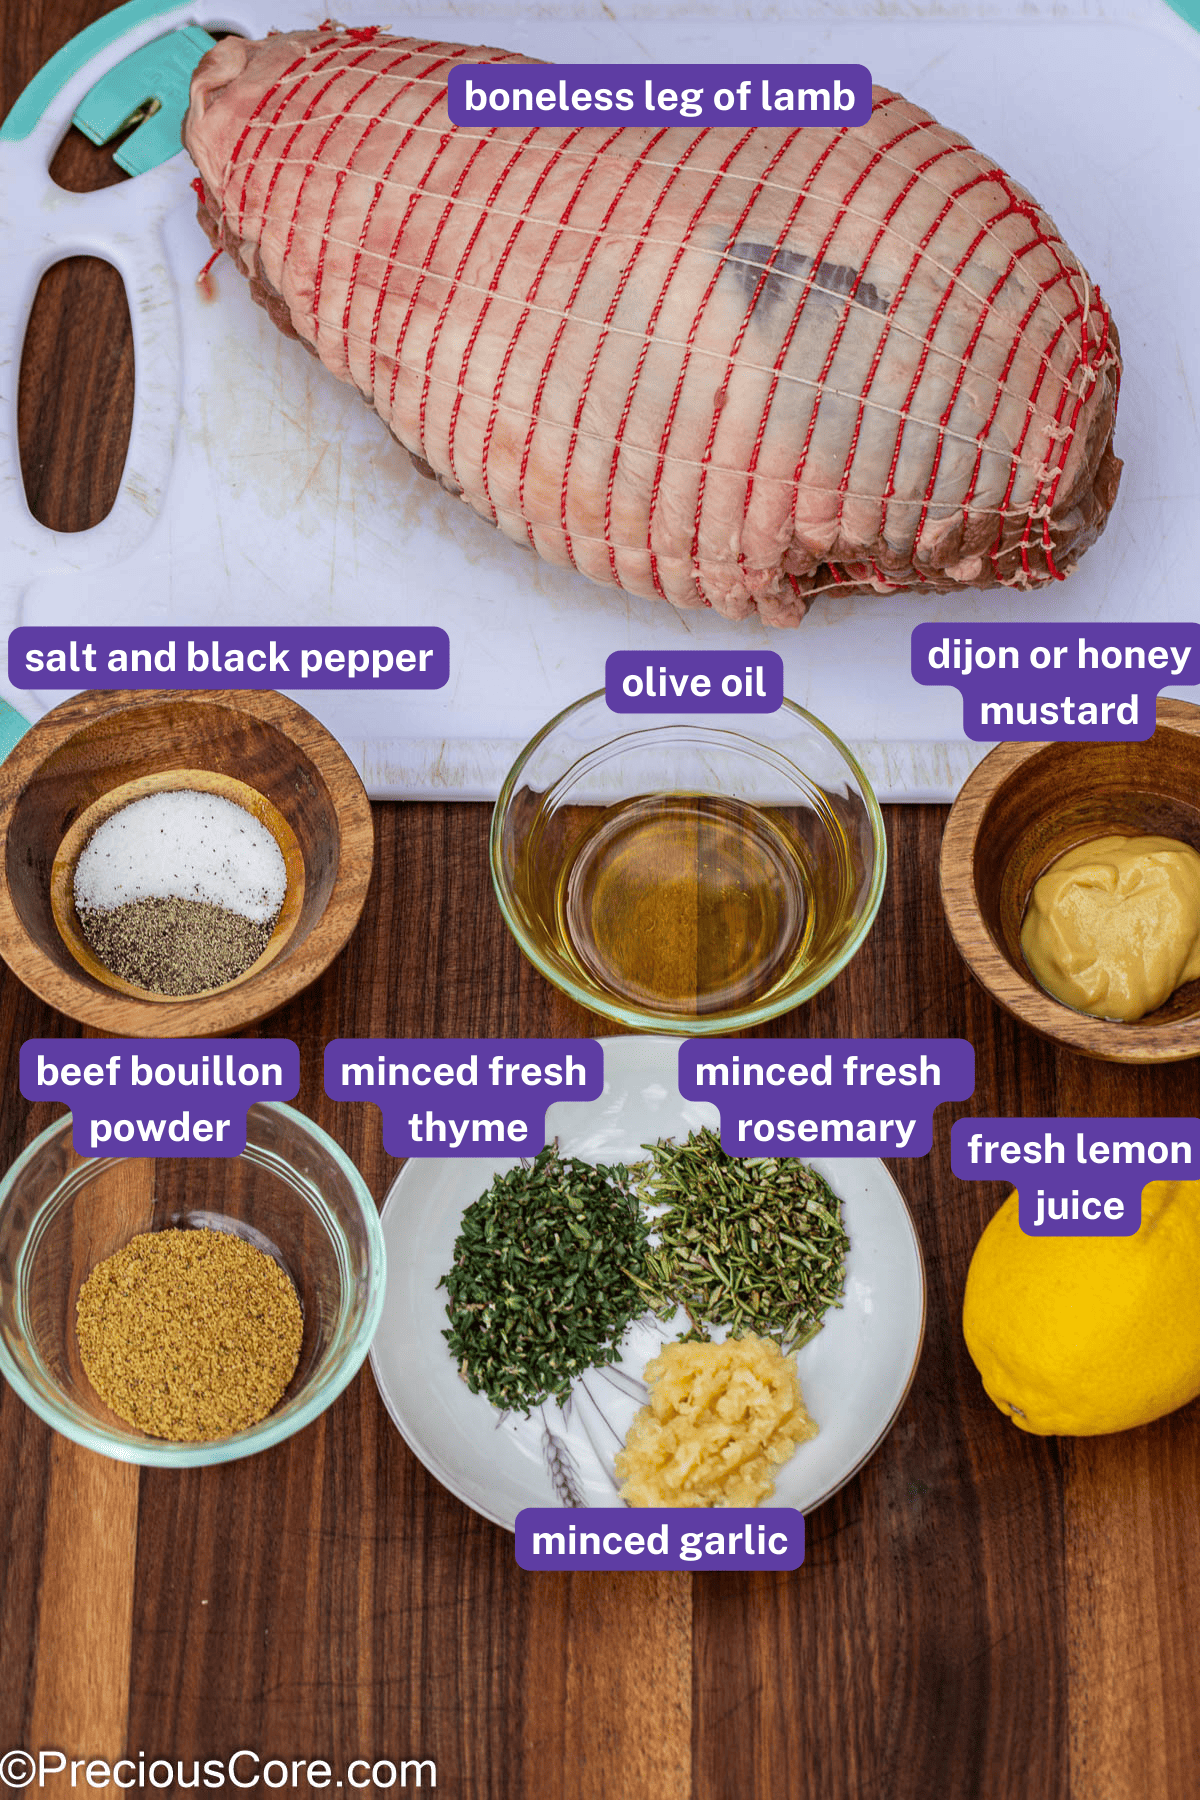 Ingredients for roasted lamb with labels.